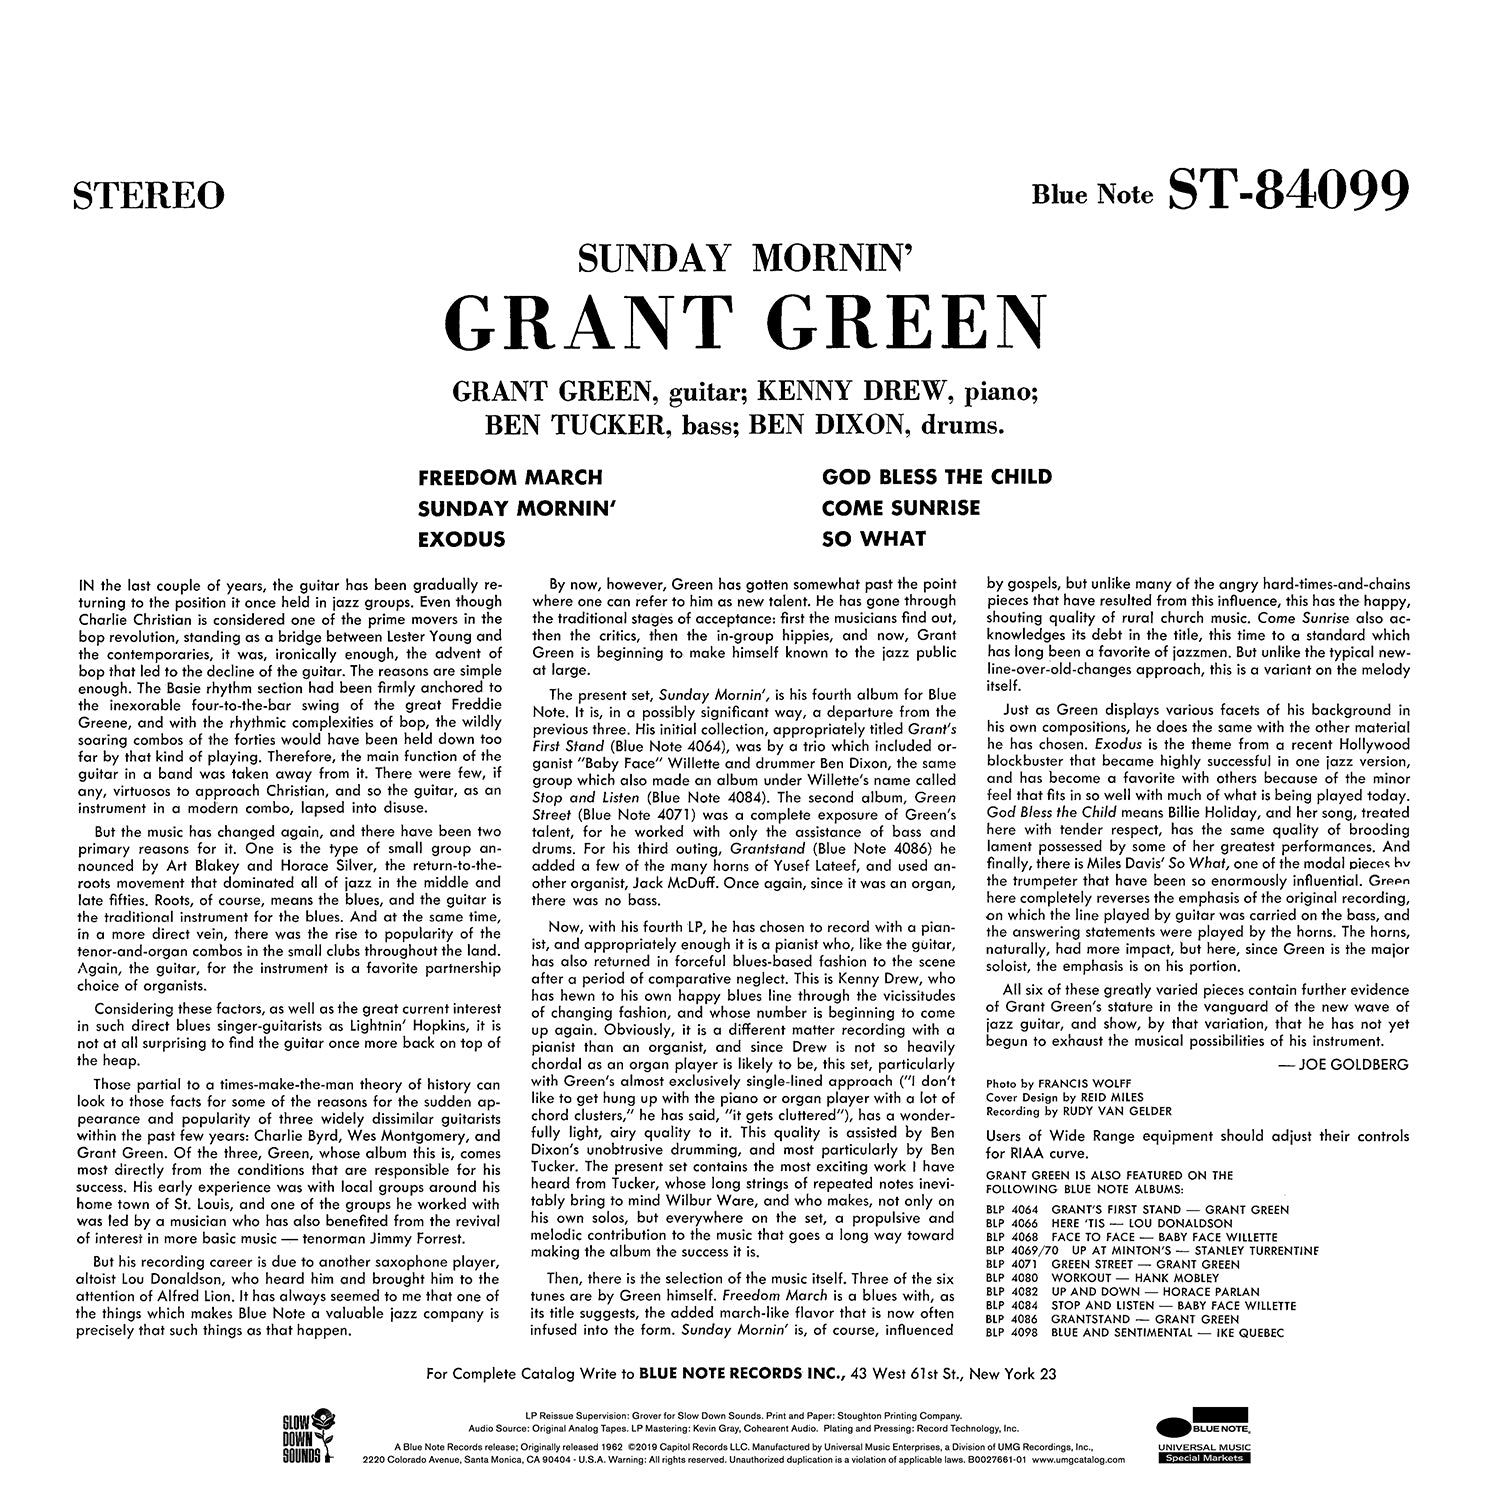 original blue not description for Grant Green's Sunday Mornin, with famous first track Freedom March 